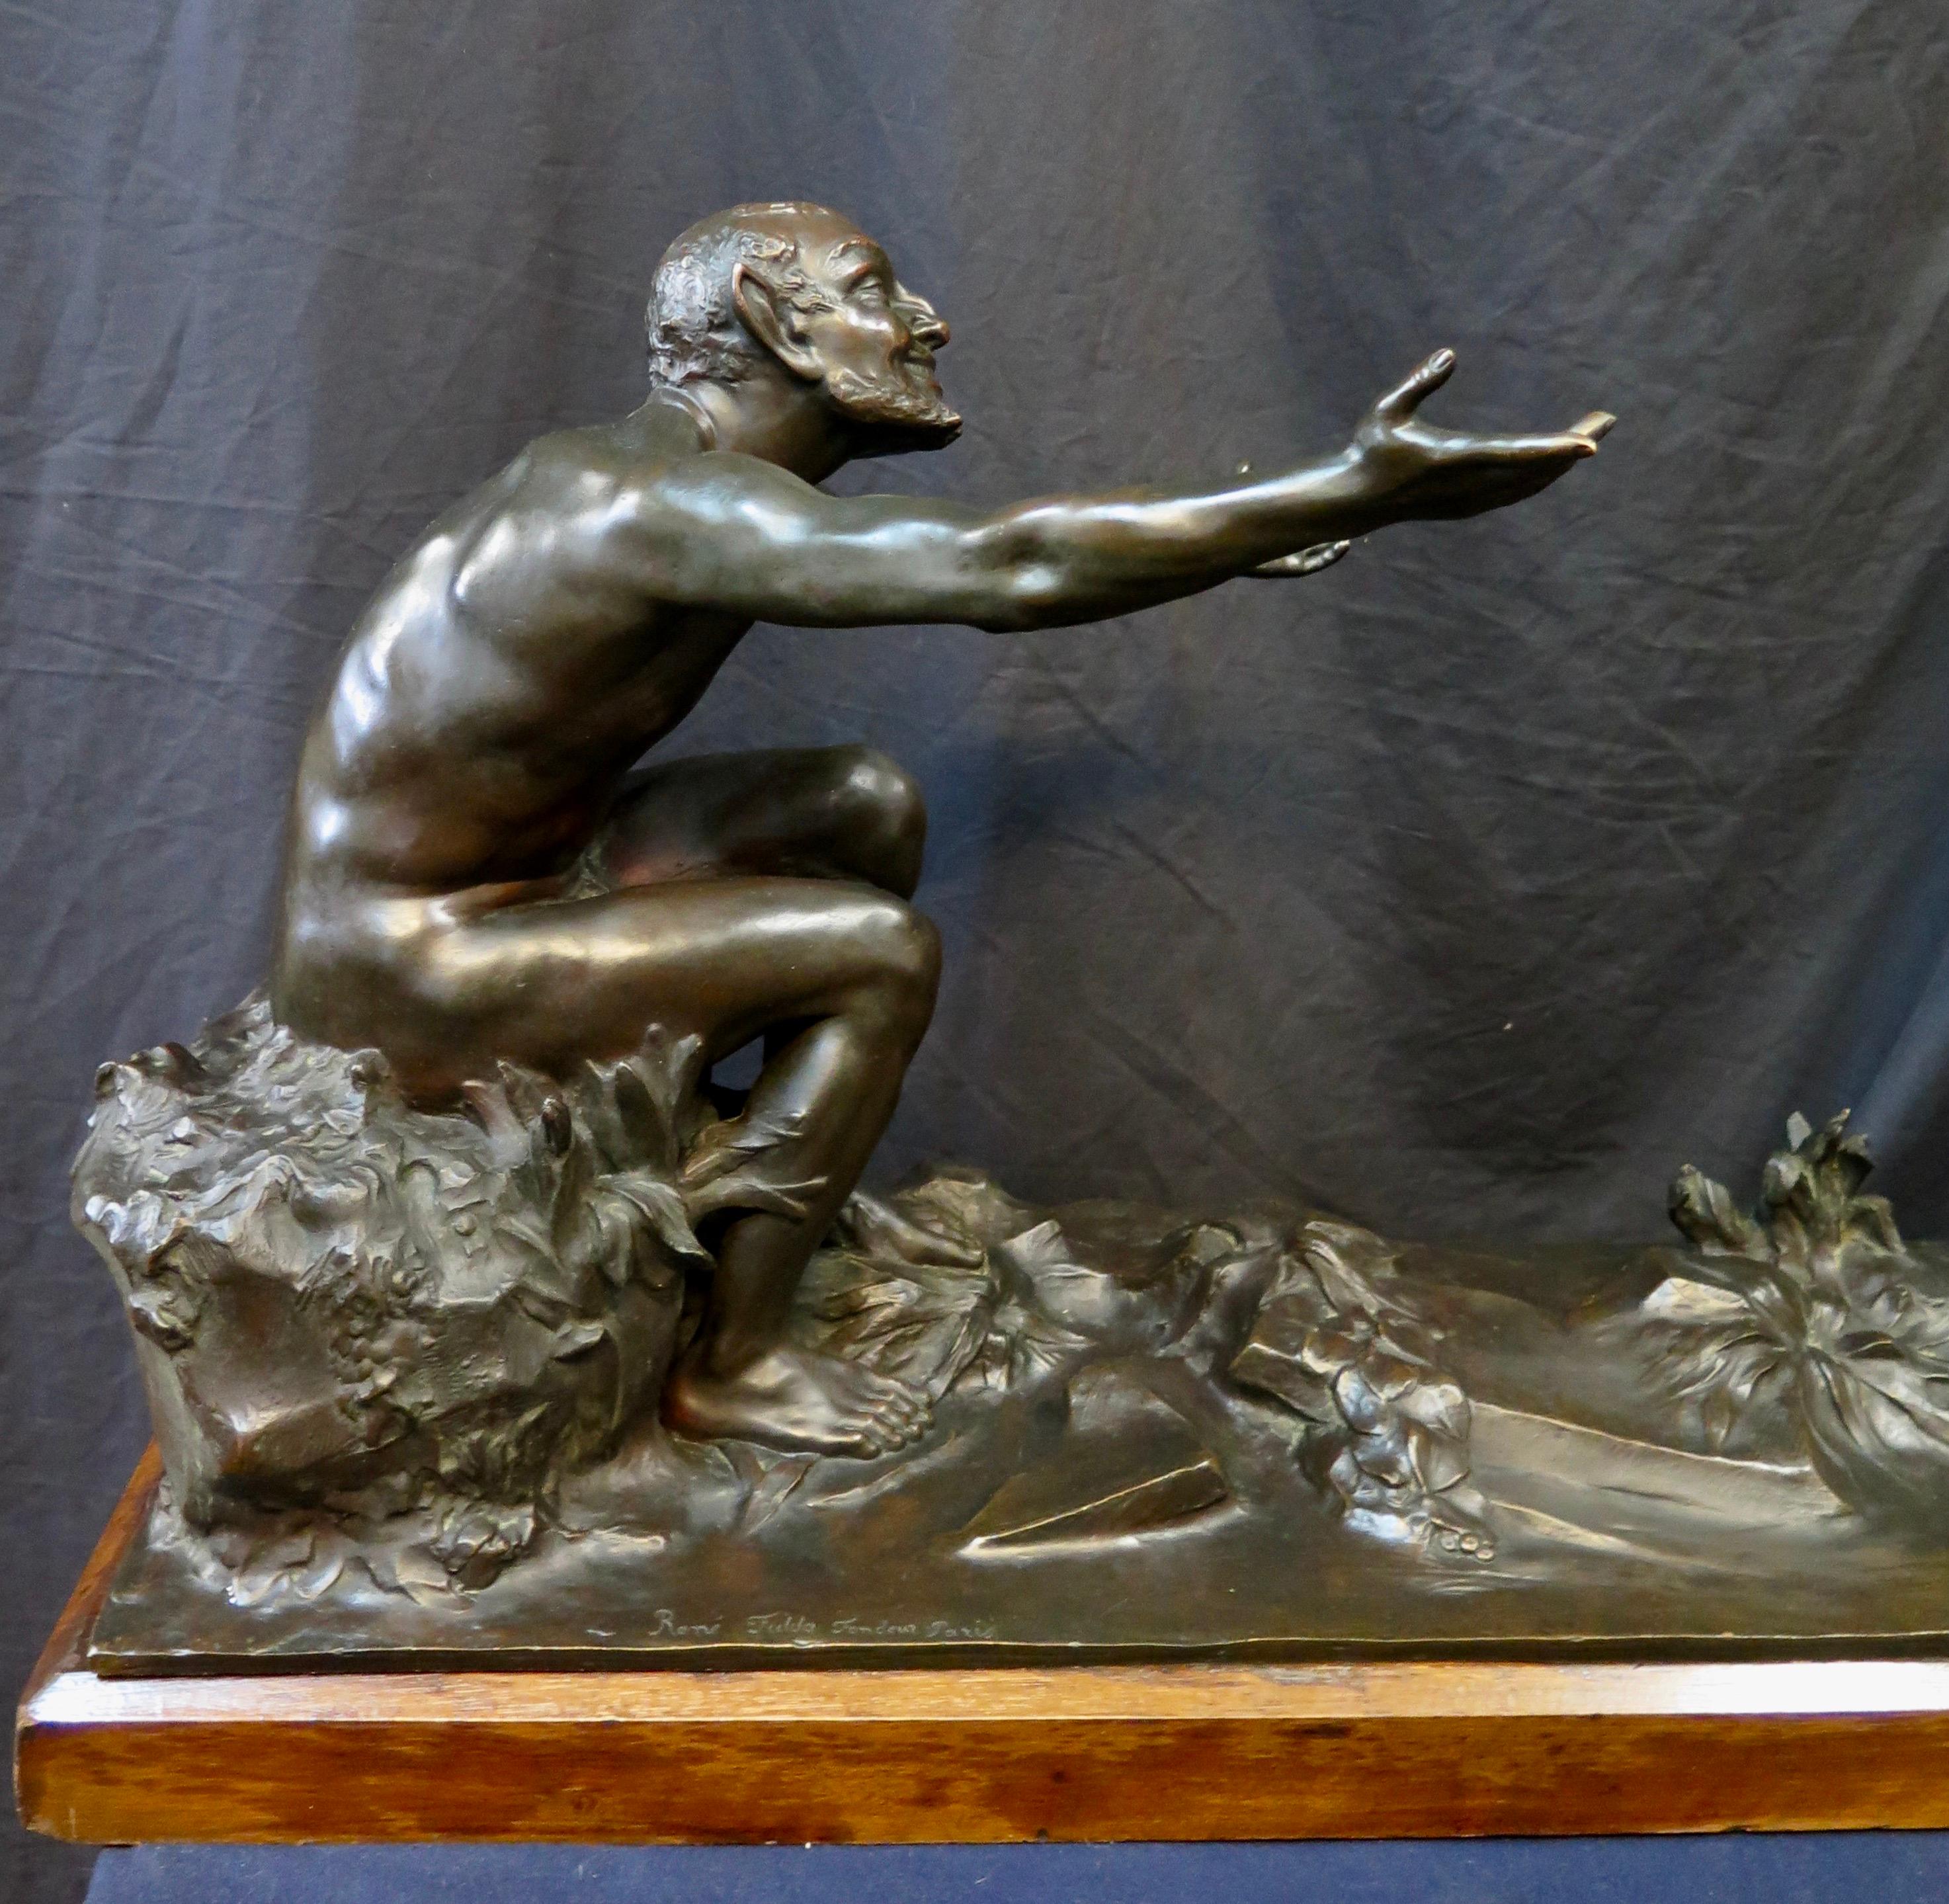 This large French vintage patinated bronze sculpture dates from the early 20th century. The artist, Etienne Forestier, depicts a beautifully rendered detailed mythological scene with skillful accuracy. A young satyr sits with outstretched arms,